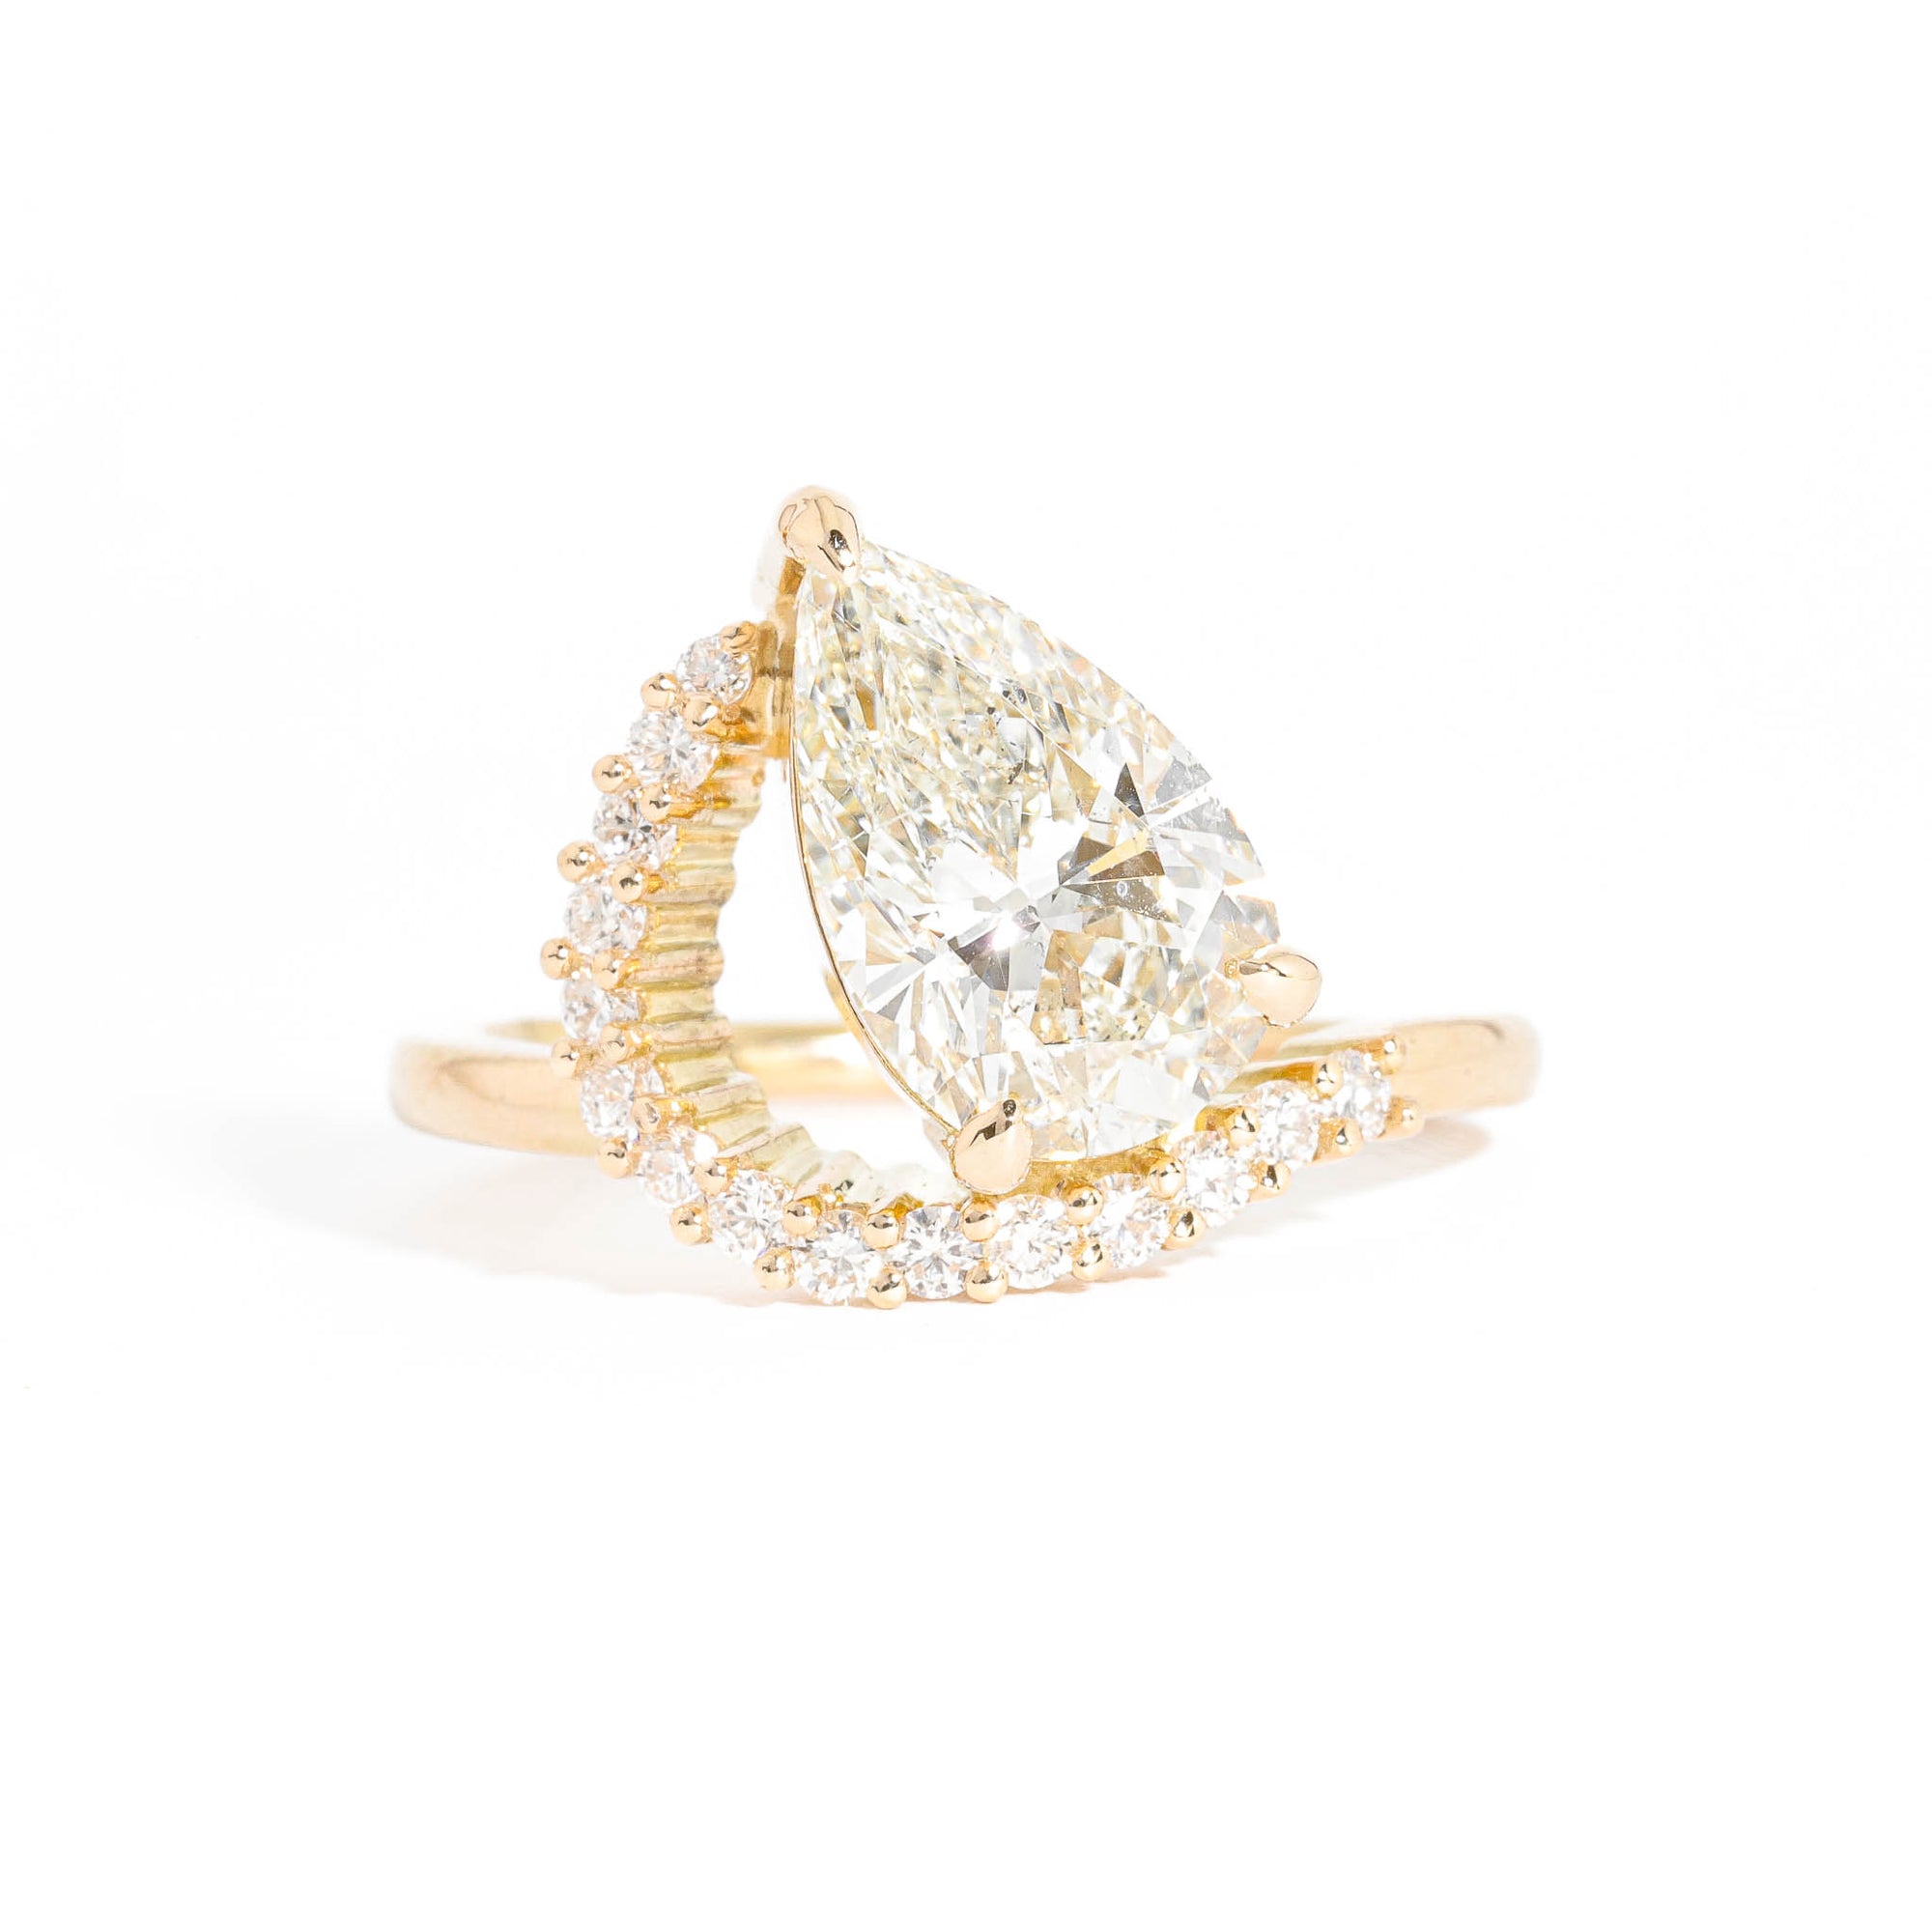 Pear Cut Diamond with an Arch of Thirteen Round Brilliant Cut Diamonds in 18 Carat Yellow Gold